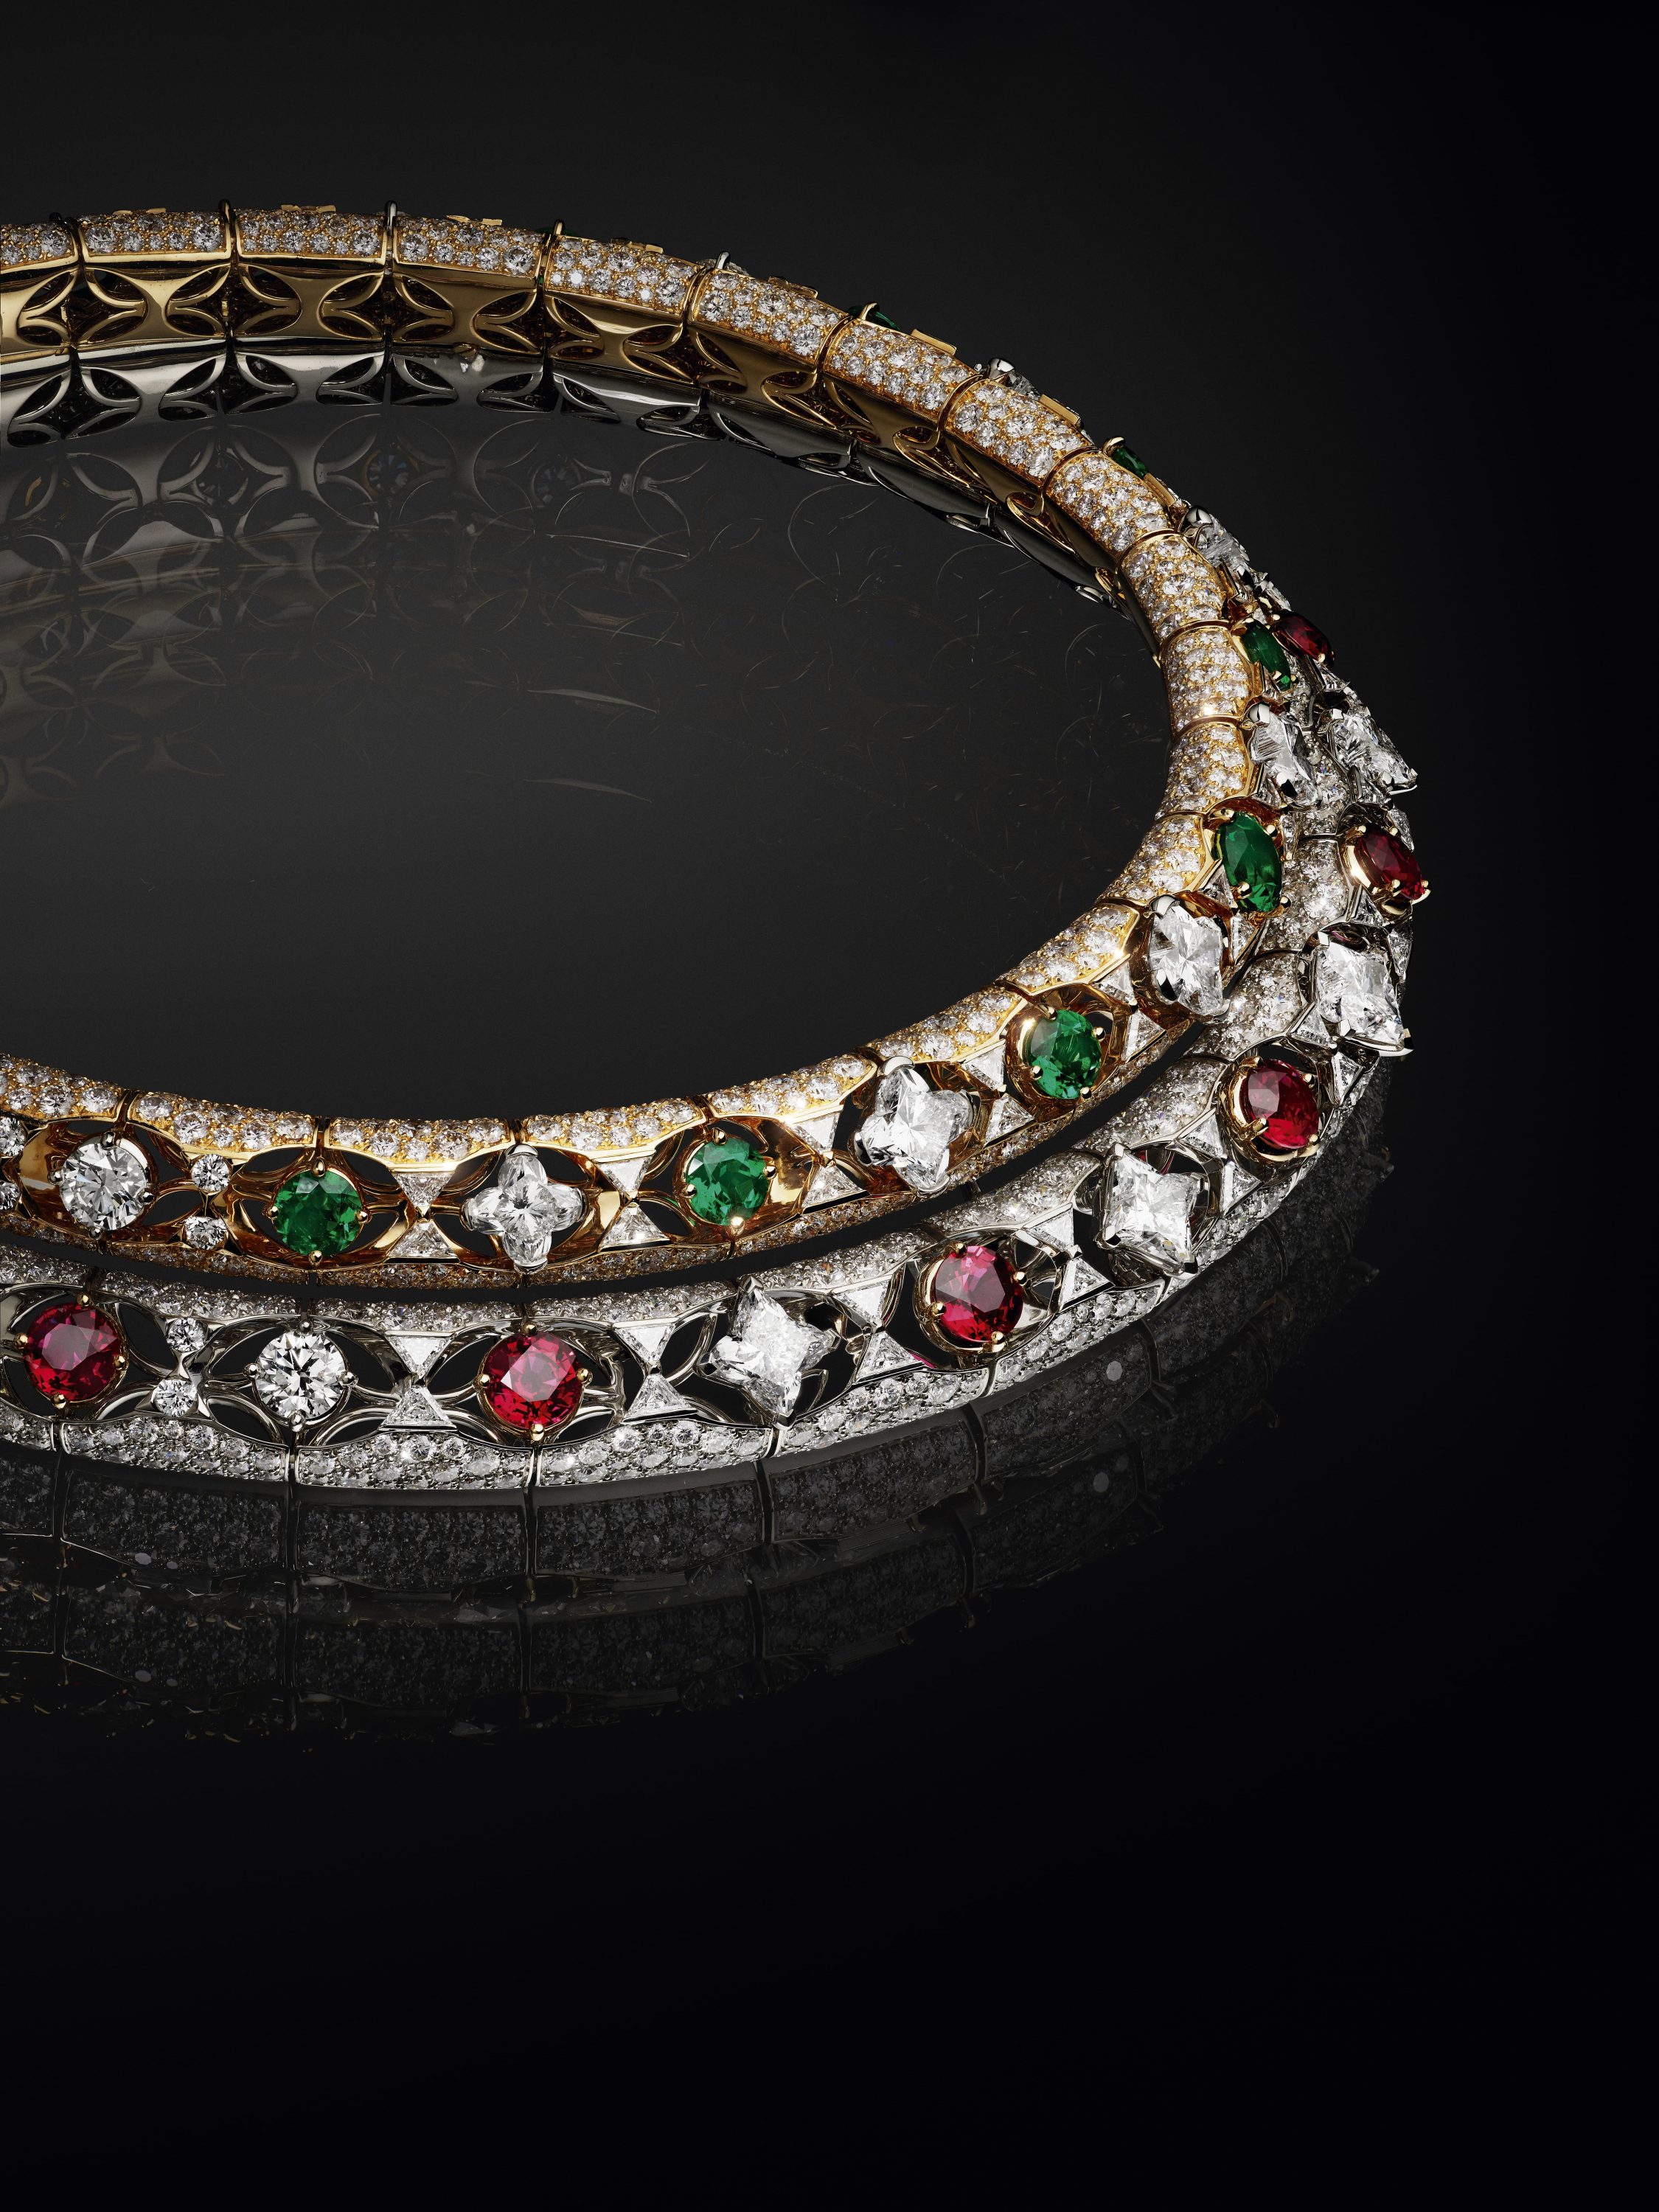 Louis Vuitton Reveals New Deep Time High Jewelry Collection